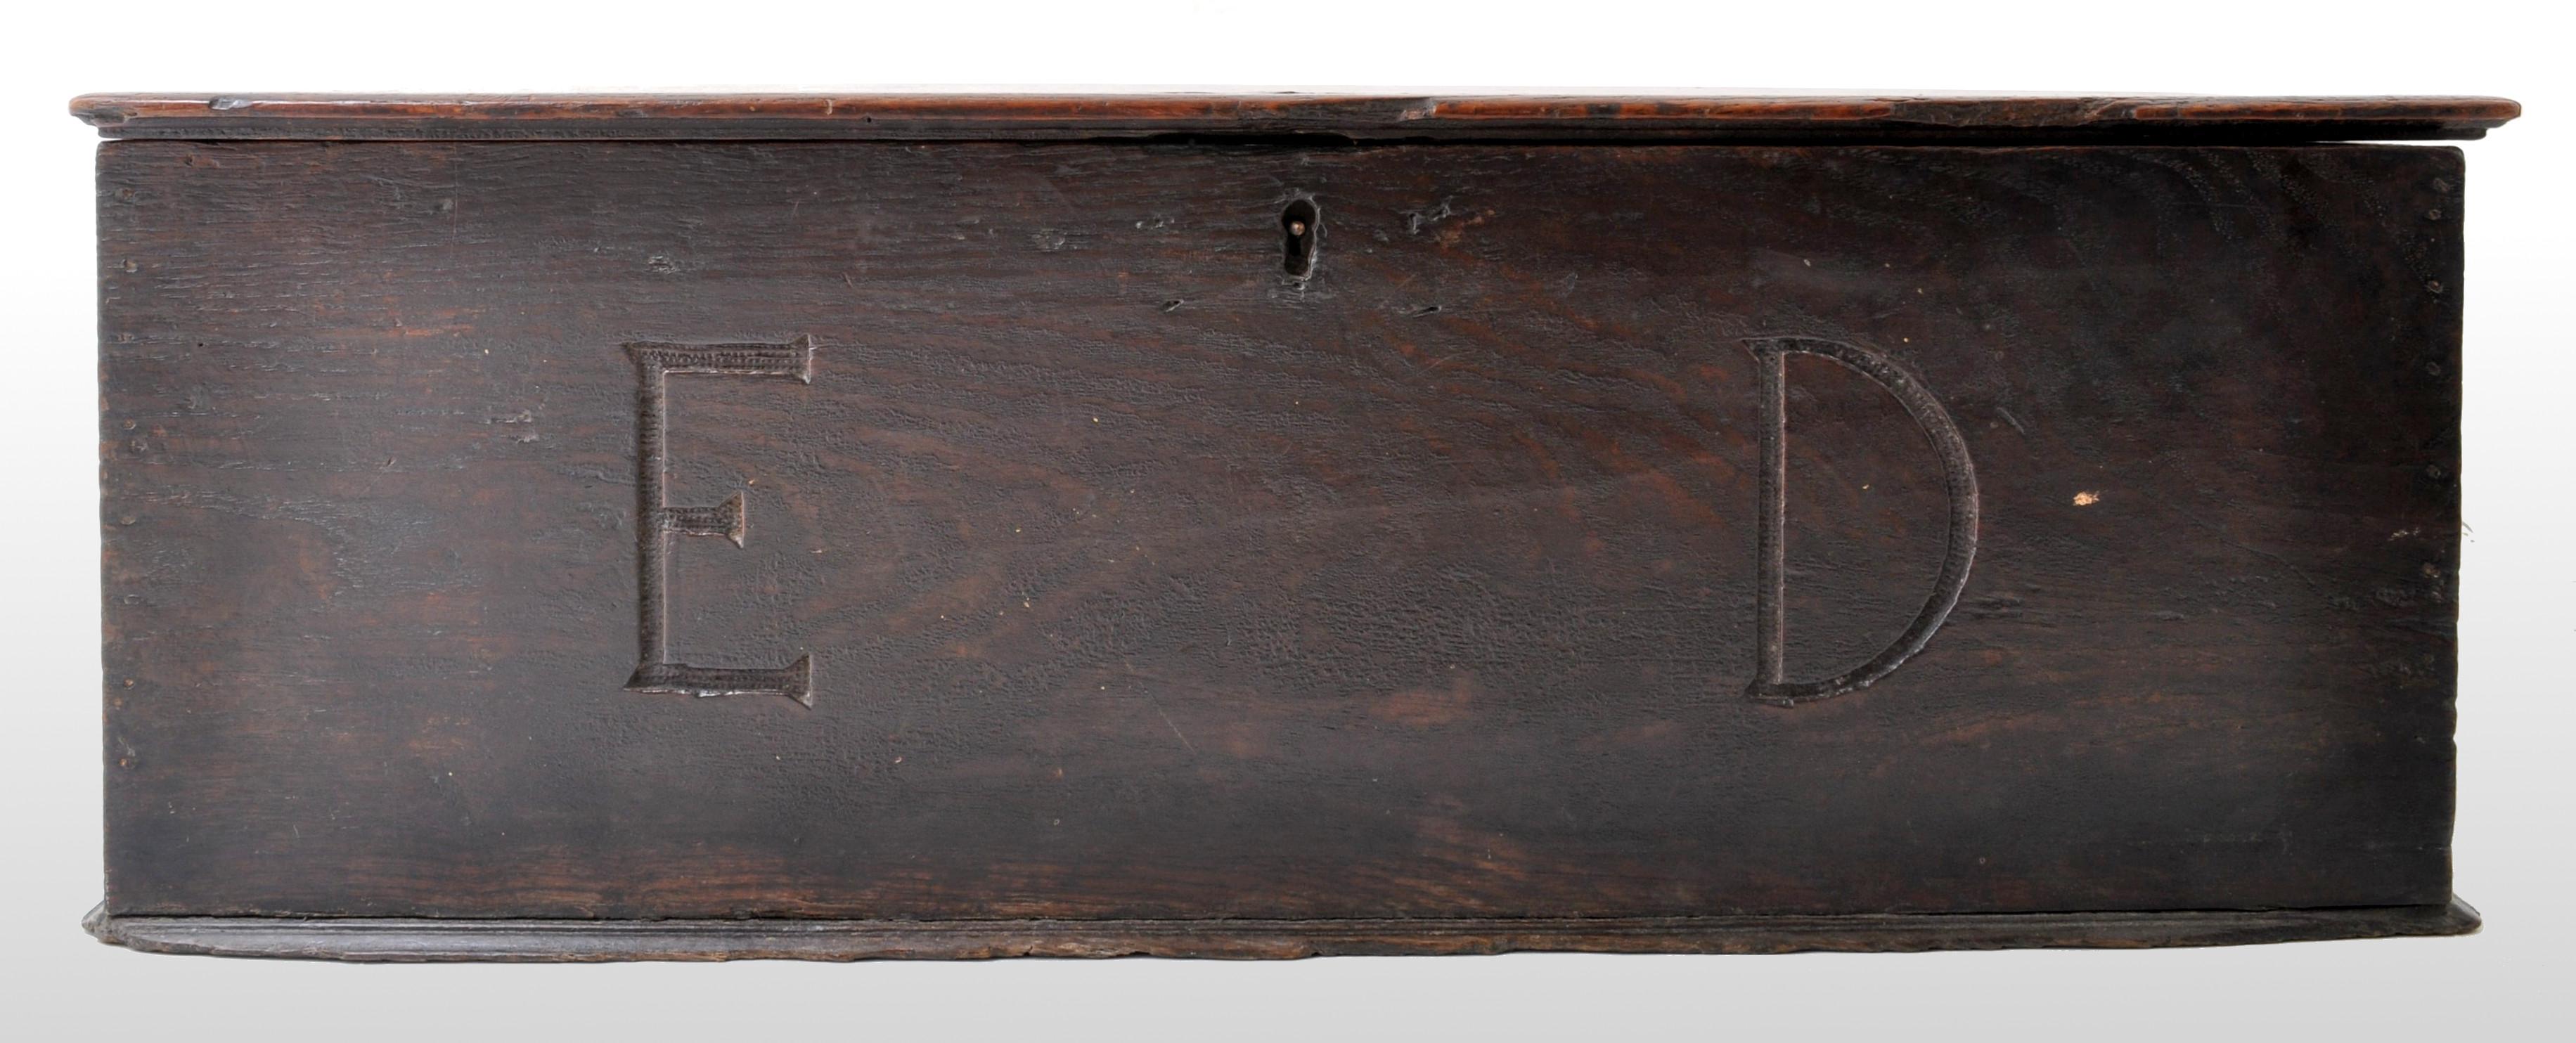 Antique Charles II Oak Bible nox, circa 1680. The box of simple construction with a hinged lid and initials 